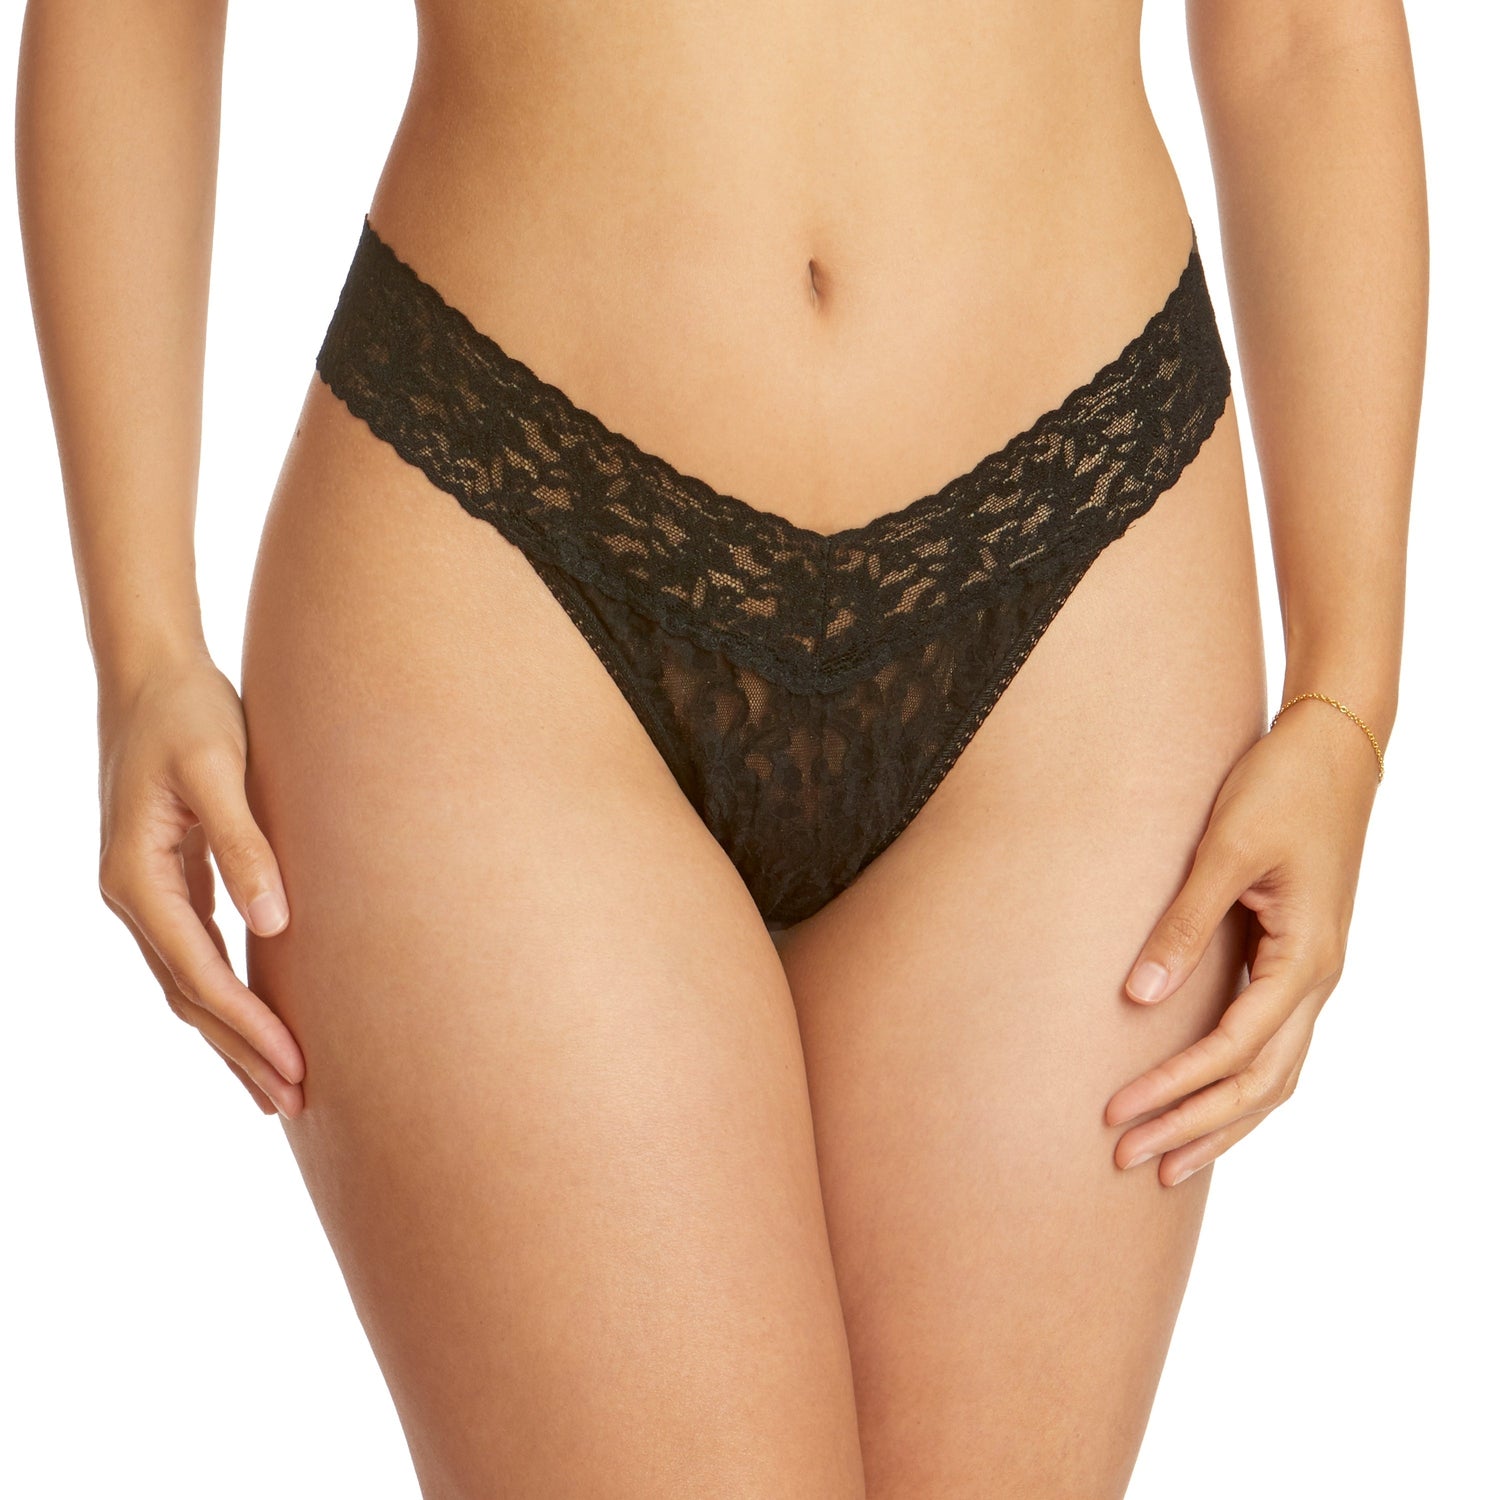 Hanky Panky One Size Thong